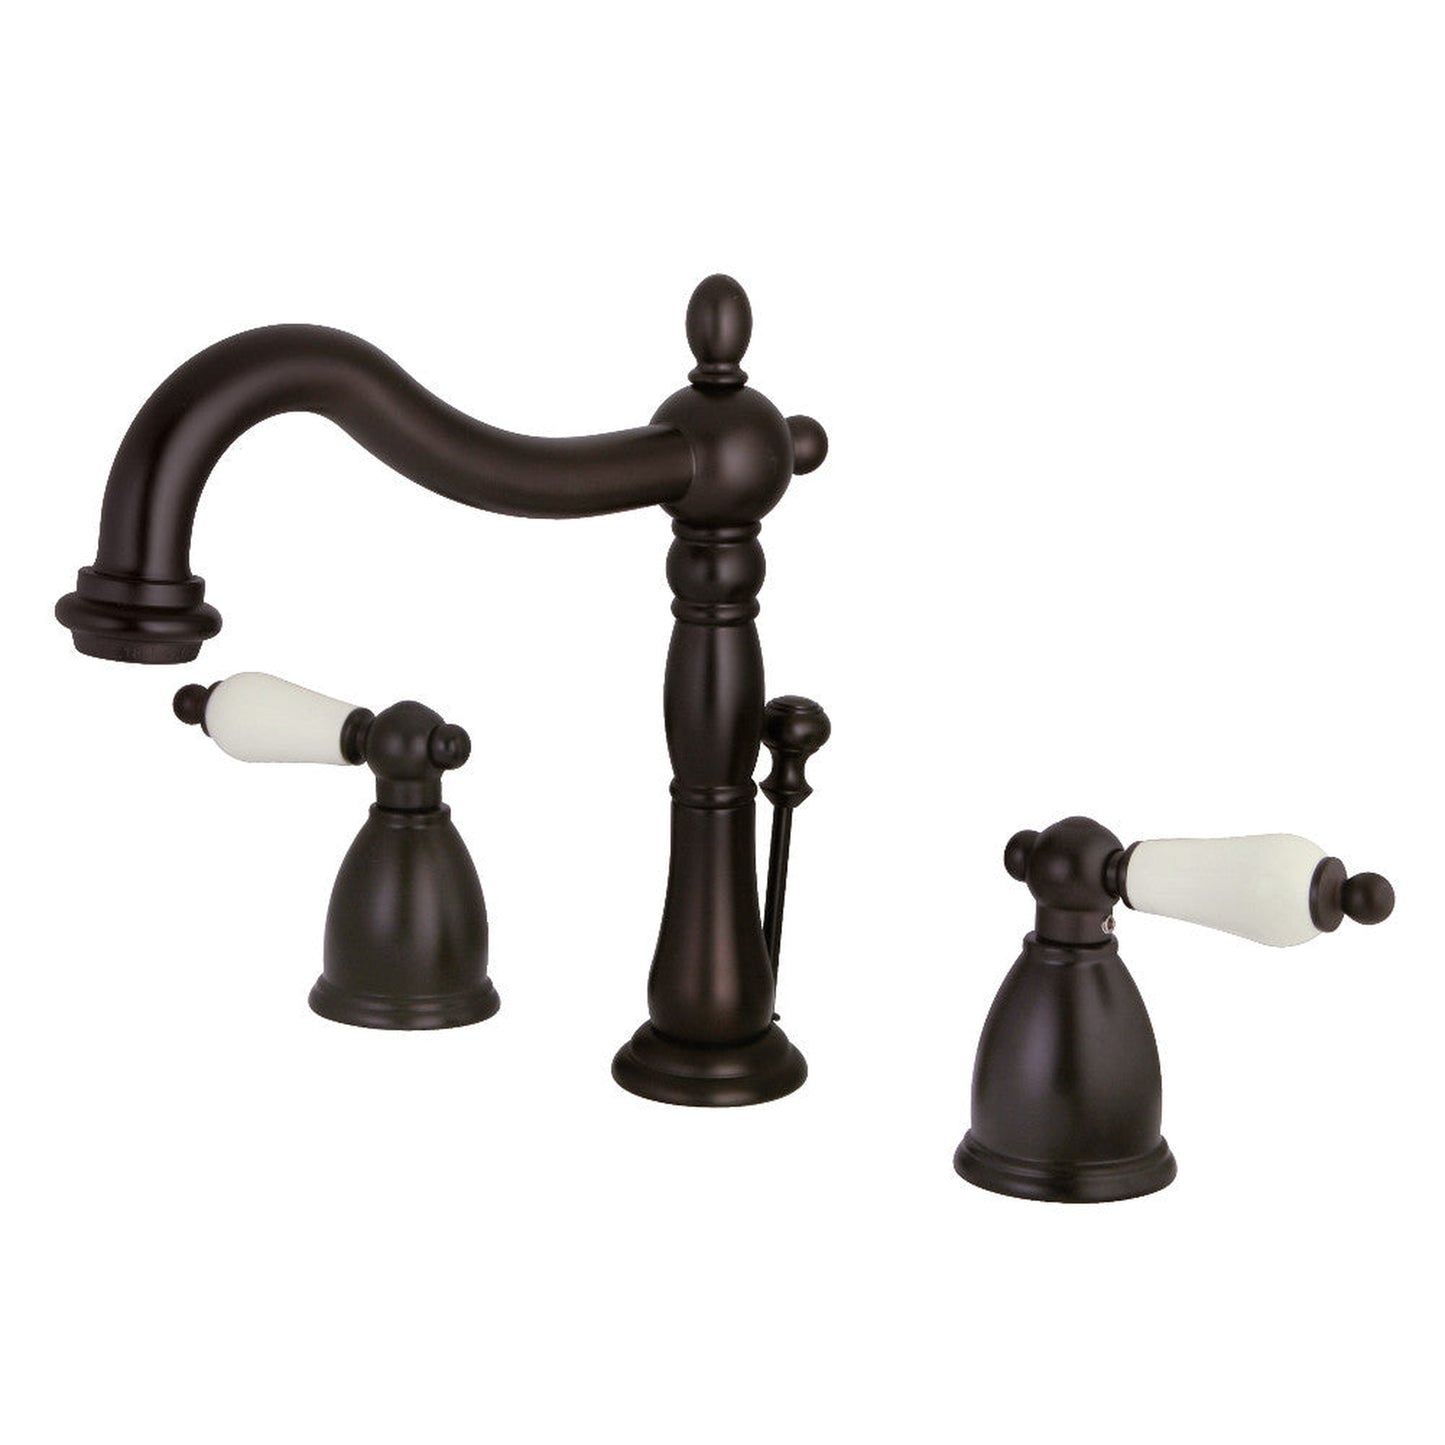 Kingston Brass KB1975PL Heritage Widespread Bathroom Faucet with Plastic Pop-Up, Oil Rubbed Bronze